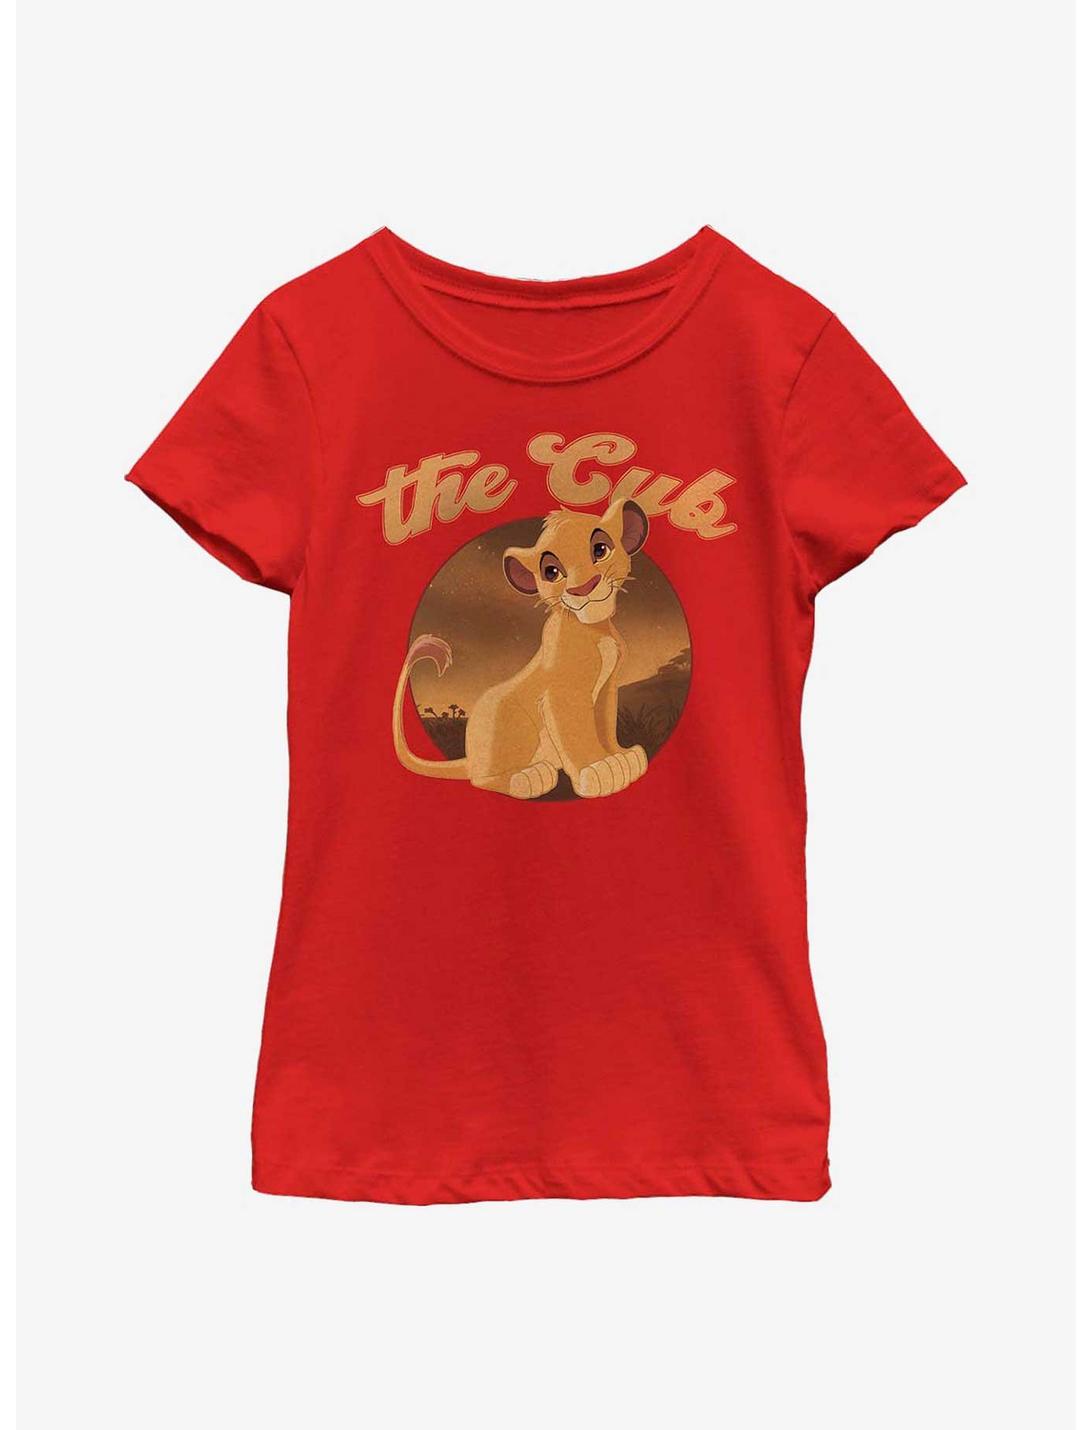 Disney The Lion King The Cub Youth Girls T-Shirt, RED, hi-res